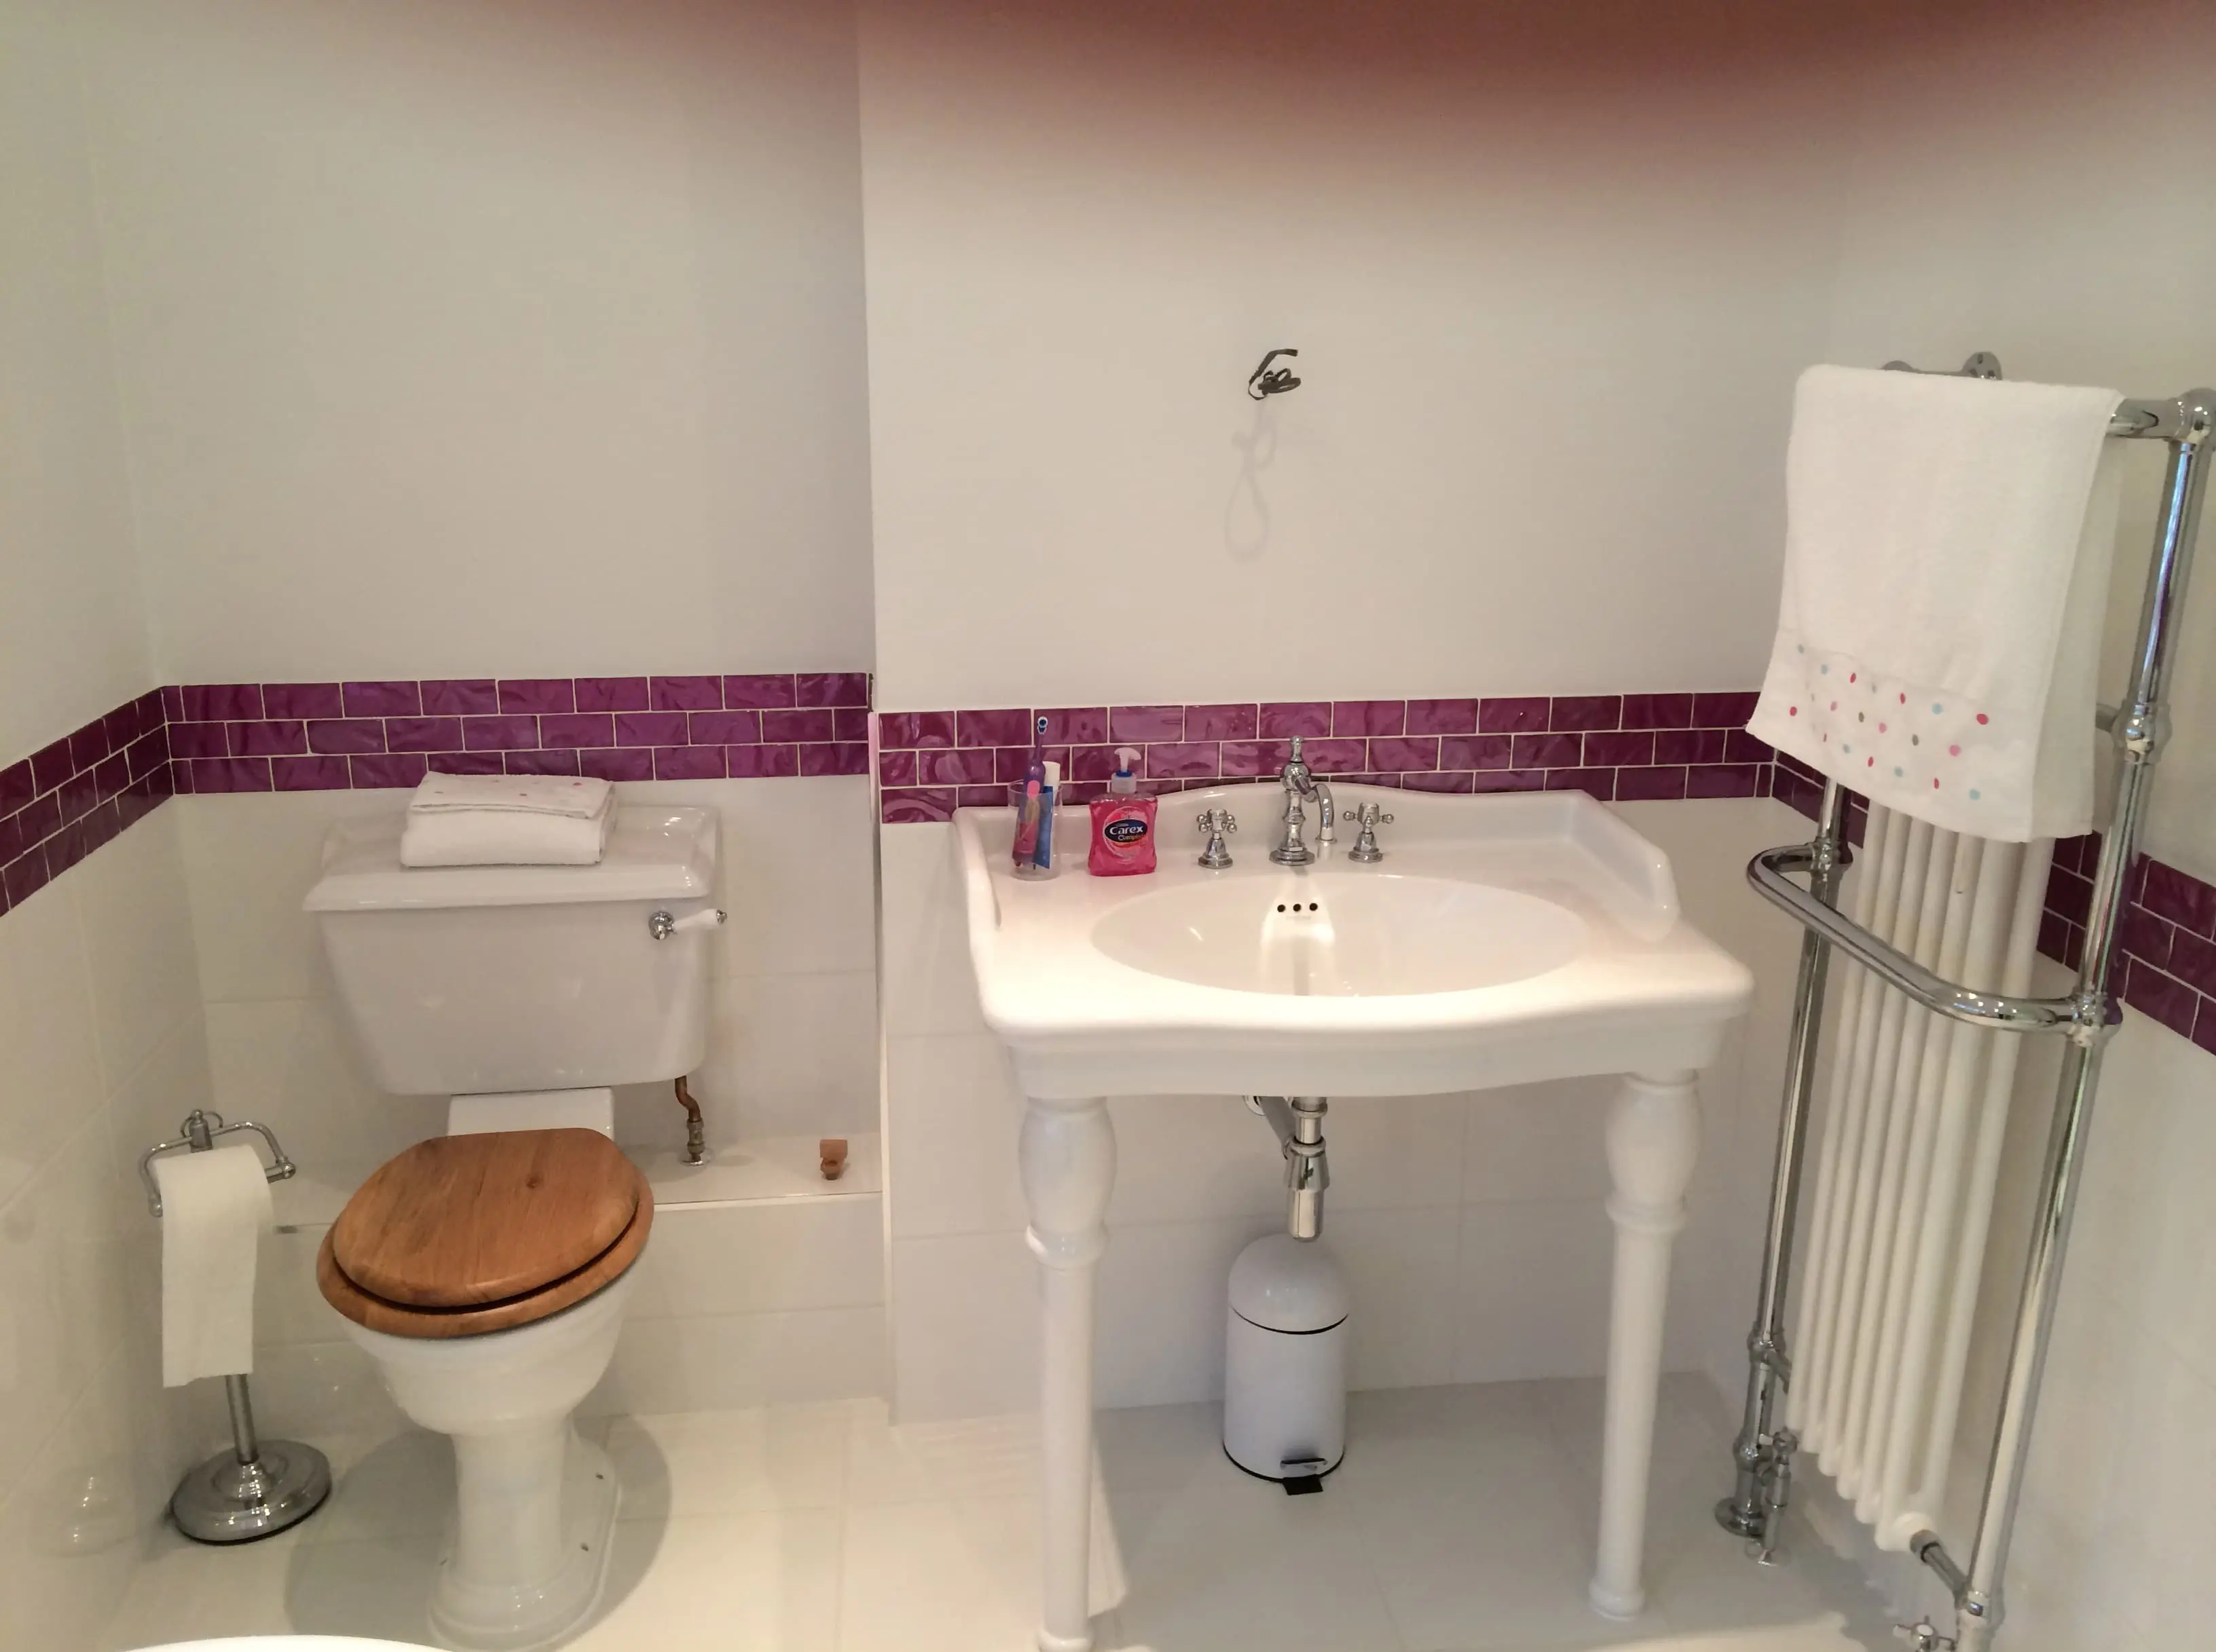 With&nbsp;over 42 years of experience, I can supply and fit bathroom fittings at competitive prices in the following areas:ReadingShinfieldCalcotWokinghamBracknellWoodleyAnd many areas more in and around&nbsp;Burghfield Common!Whether you want me to install a&nbsp;new wet room&nbsp;or just&nbsp;re-tile&nbsp;your existing bathroom, I can give your home a new look. I take great pride in providing a personalised service to&nbsp;suit your budget and taste.&nbsp;